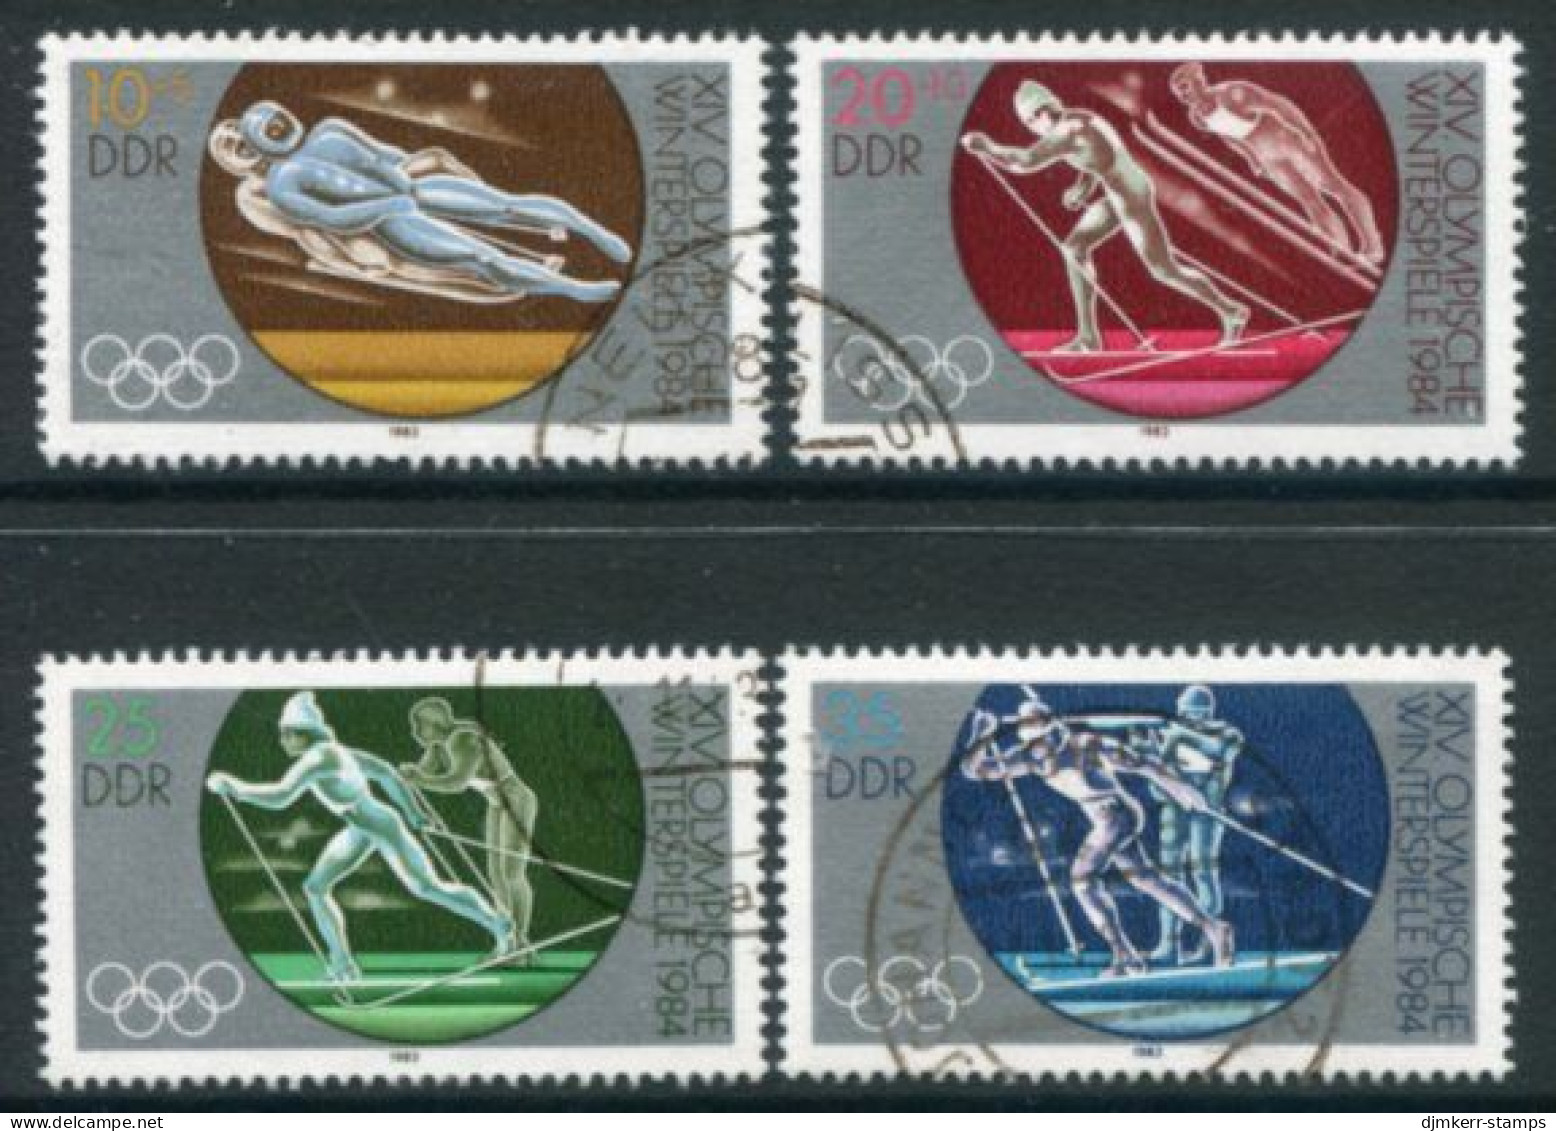 DDR 1983 Winter Olympic Games Used.  Michel 2839-42 - Usati